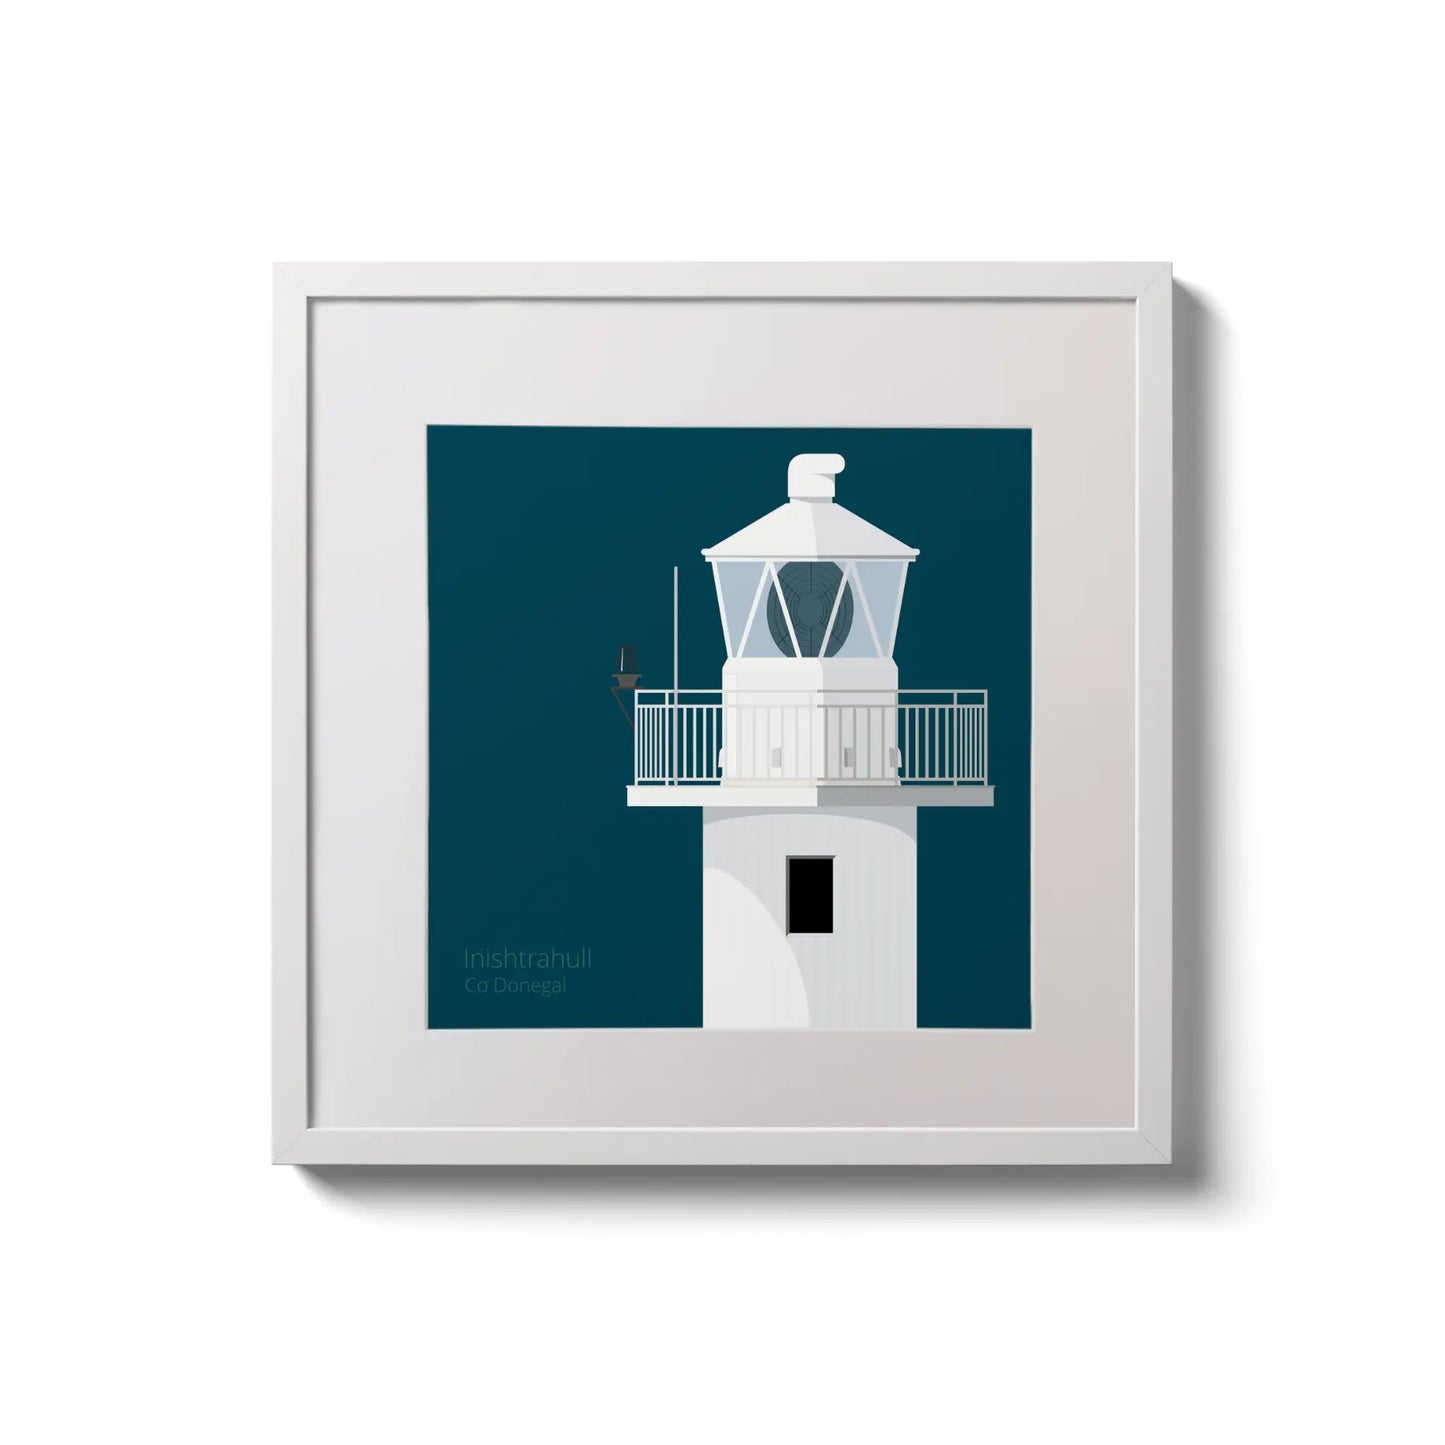 Illustration of Inishtrahull lighthouse on a midnight blue background,  in a white square frame measuring 20x20cm.